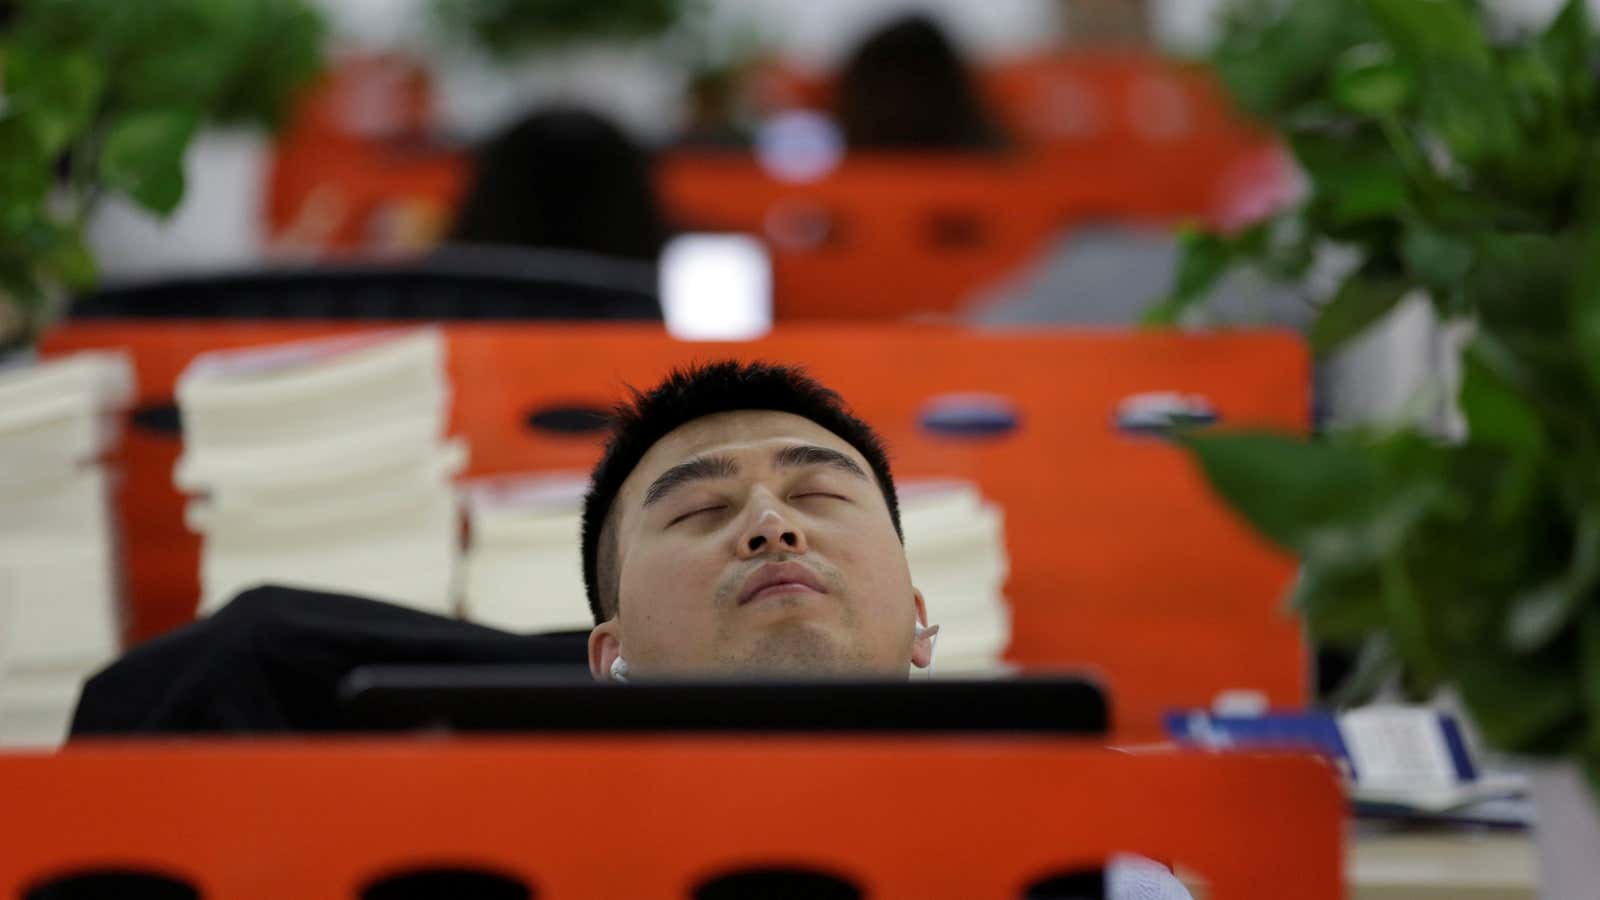 Cui Meng, a Co-founder of Goopal Group, takes a nap in his seat after lunch, in Beijing, China, April 21, 2016. Office workers sleeping on…